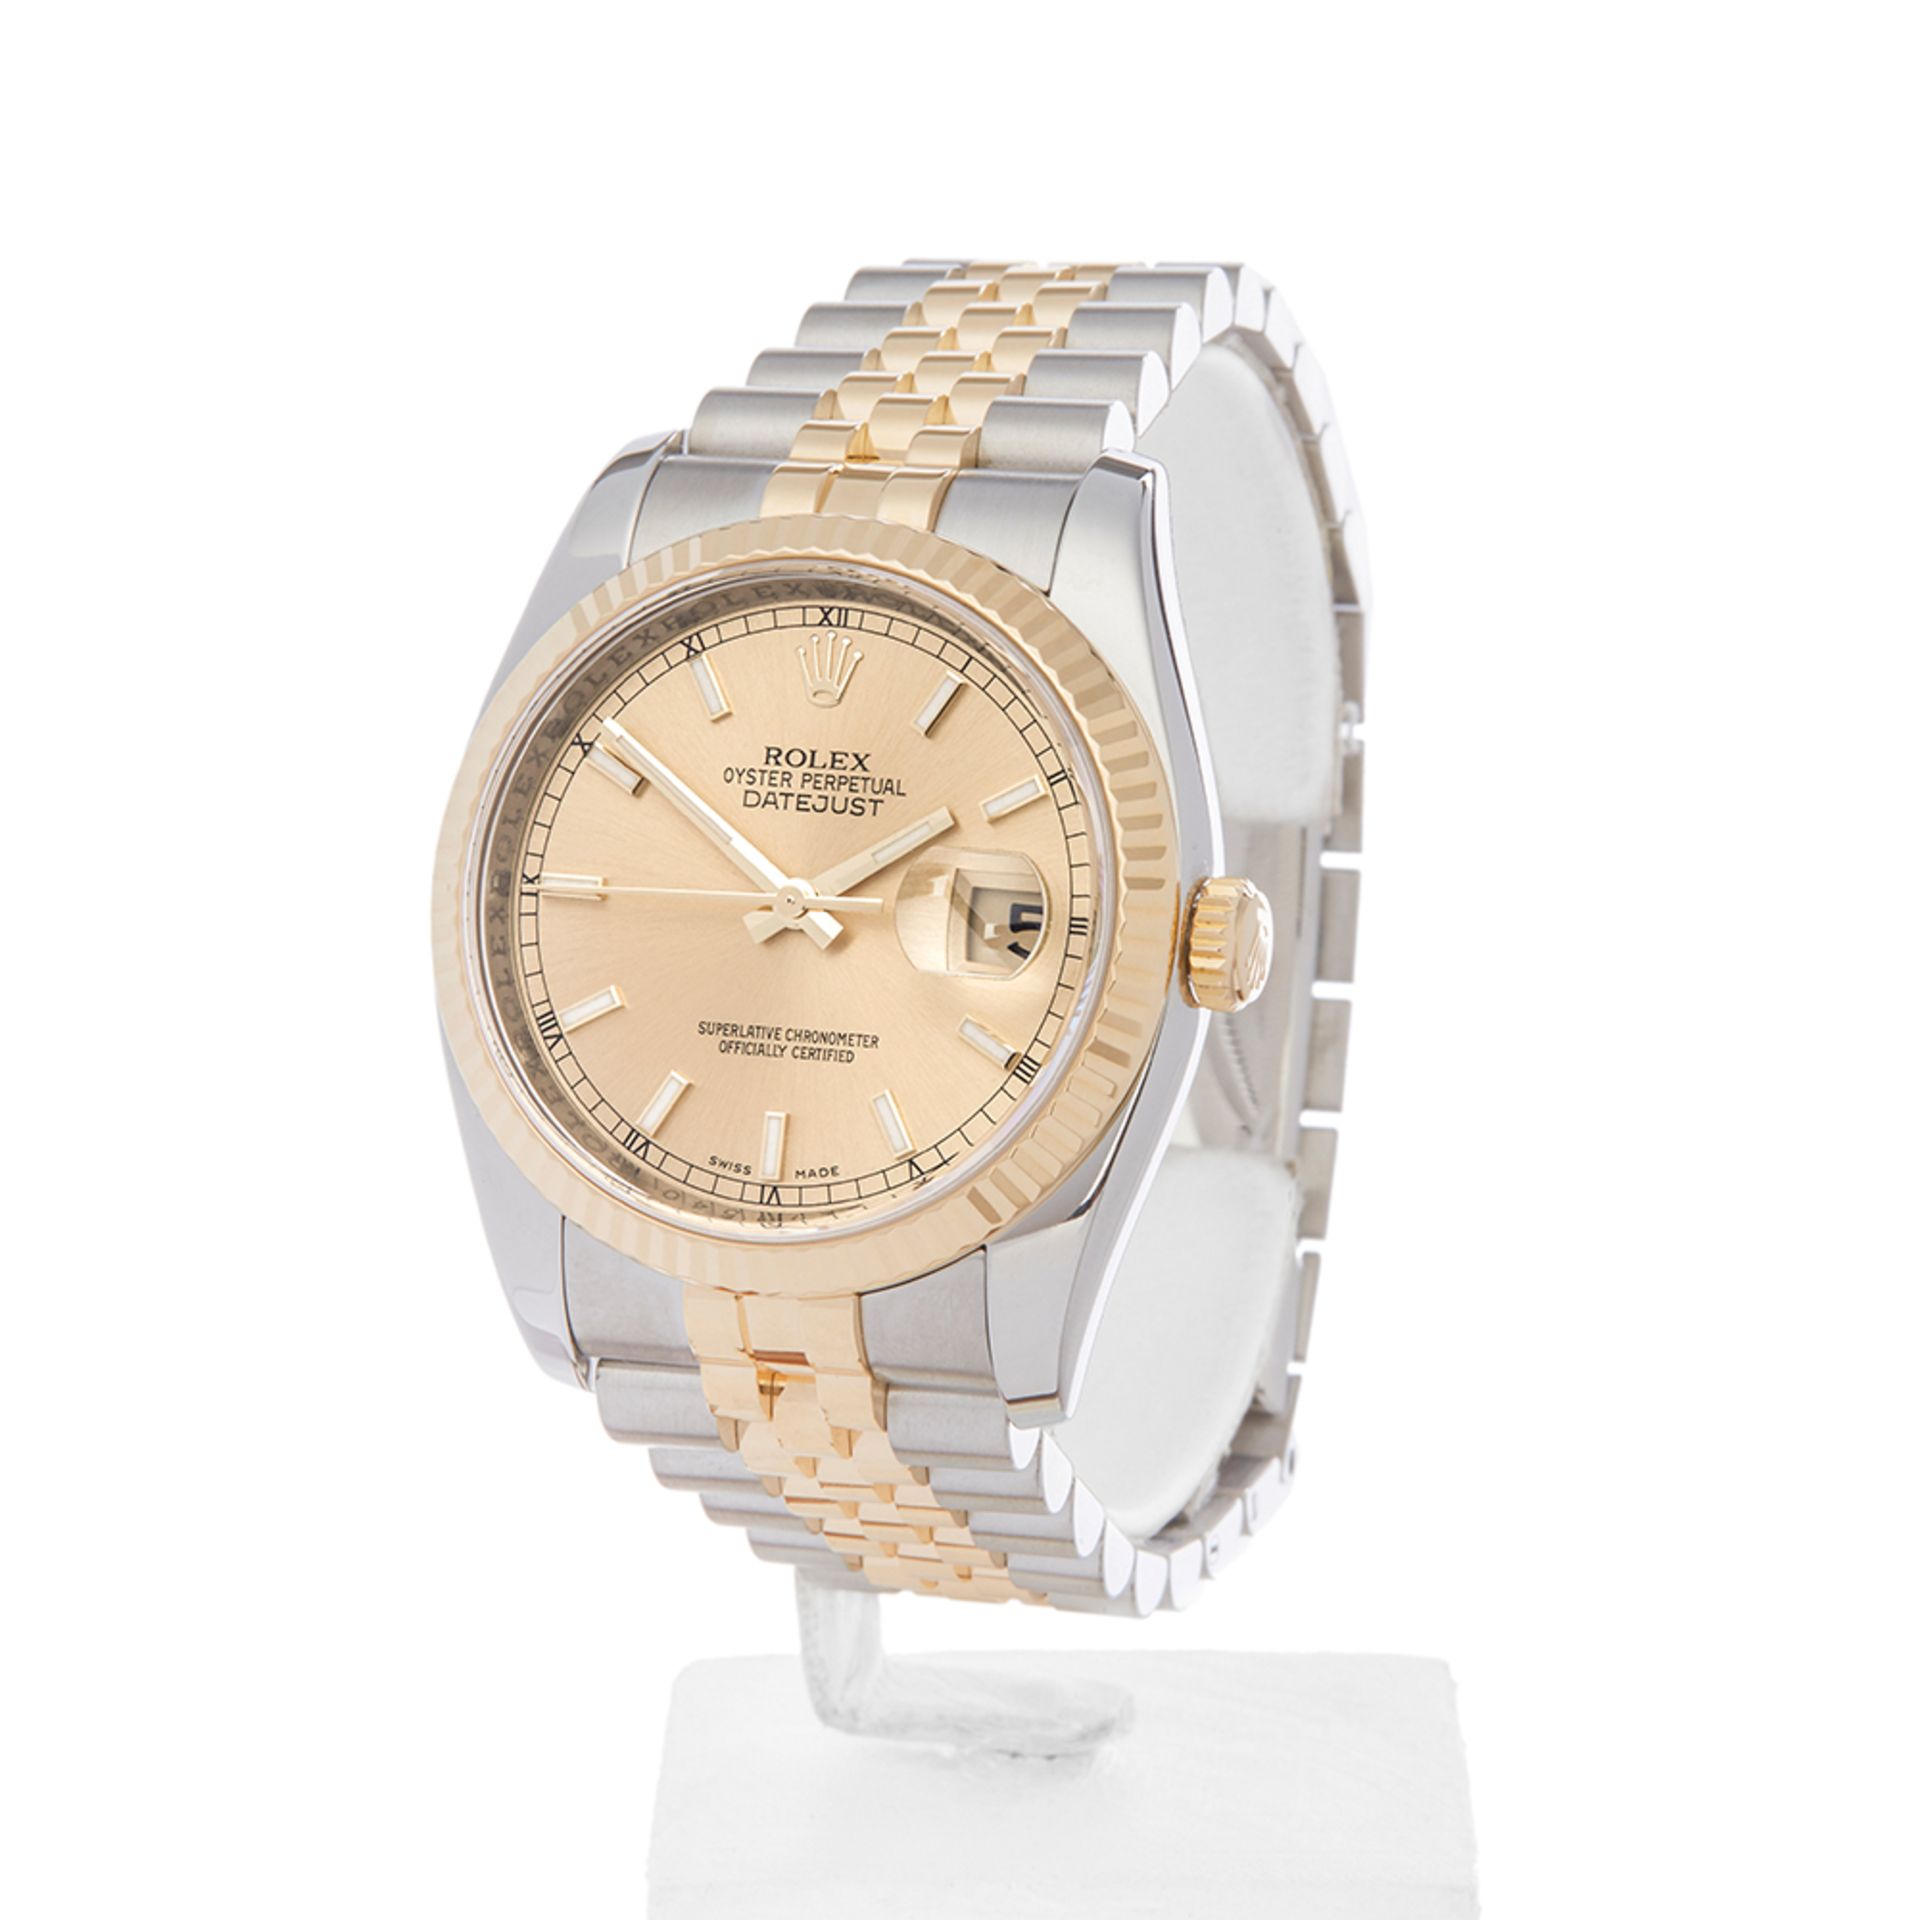 Datejust 36mm Stainless Steel & 18K Yellow Gold - 116233 - Image 3 of 8